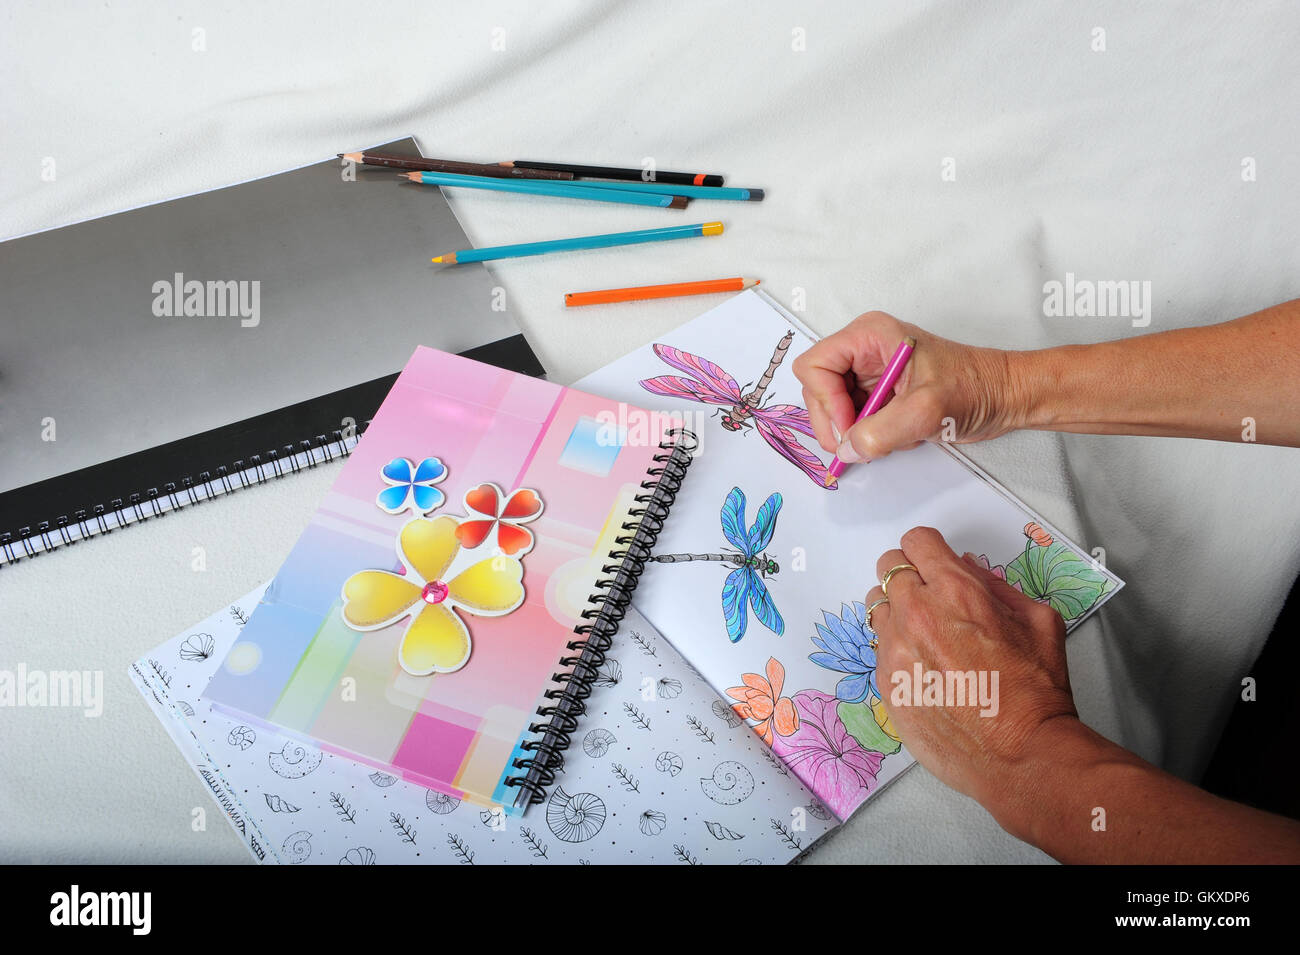 The hands of adult female. Coloring in coloring book. Pencils and note books lying around on table. Stock Photo